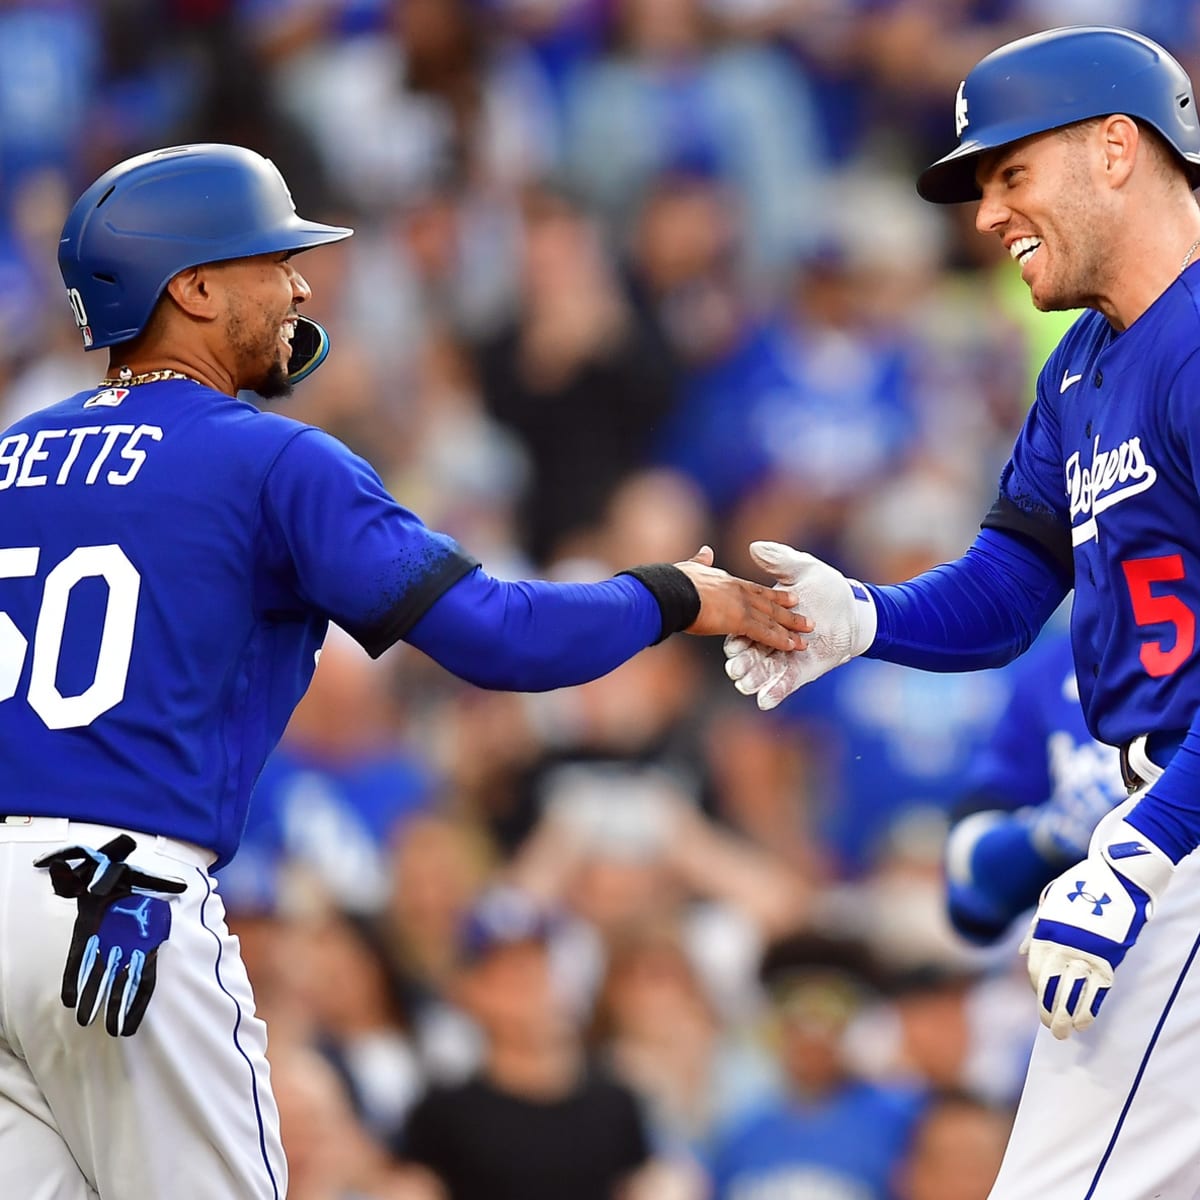 Mookie Betts and Freddie Freeman struggle as Dodgers suffer early